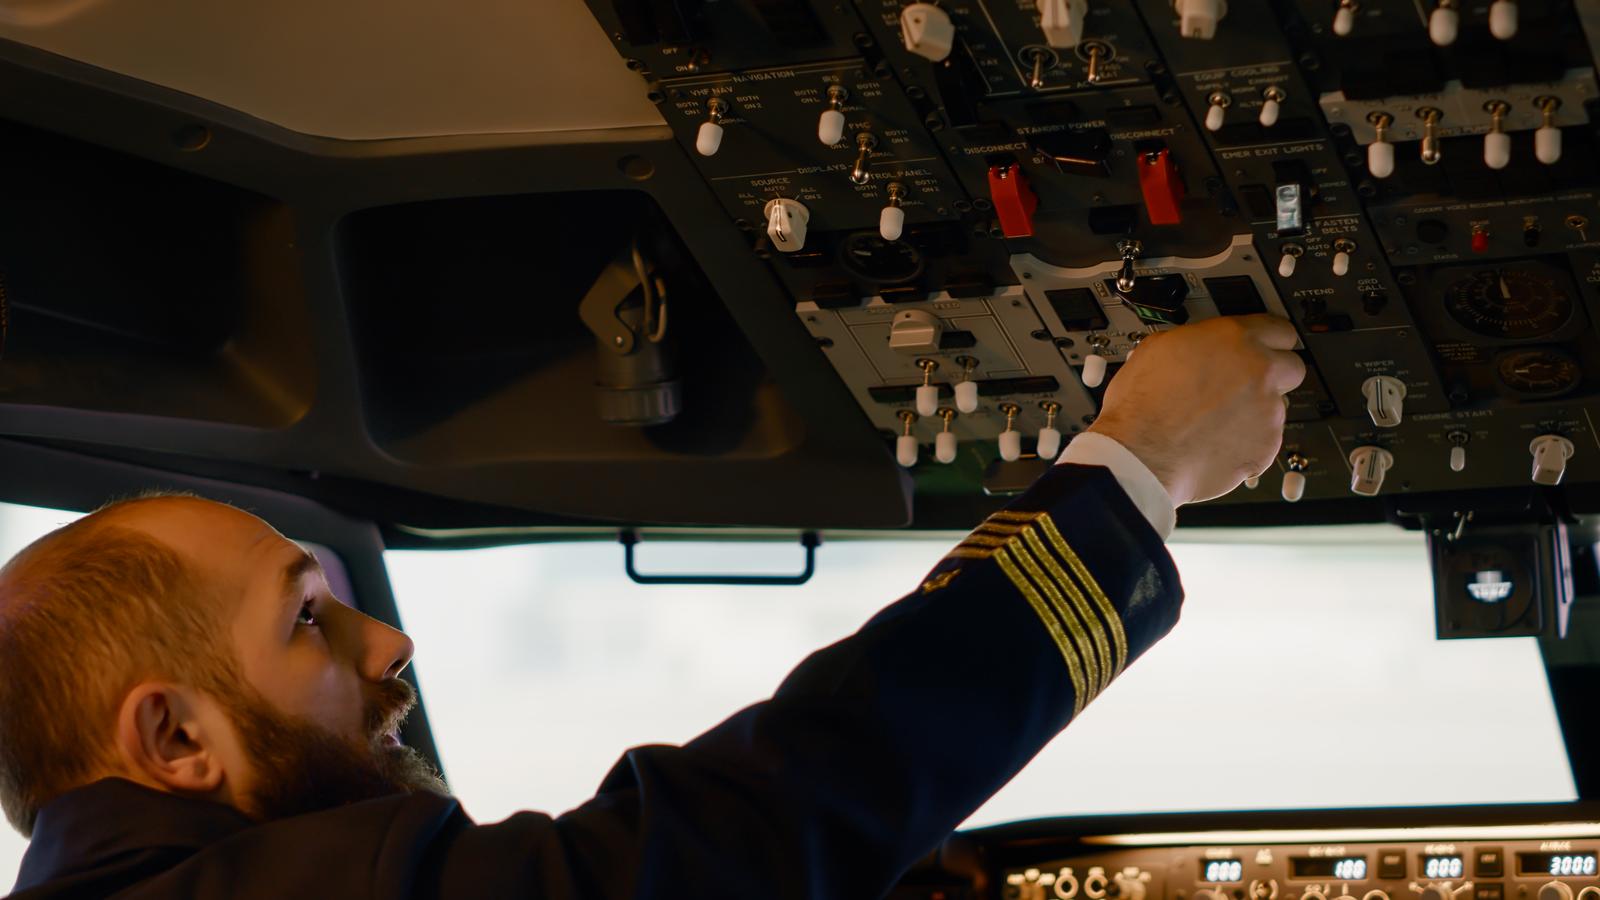 Airplane captain starting engine with power buttons on dashboard